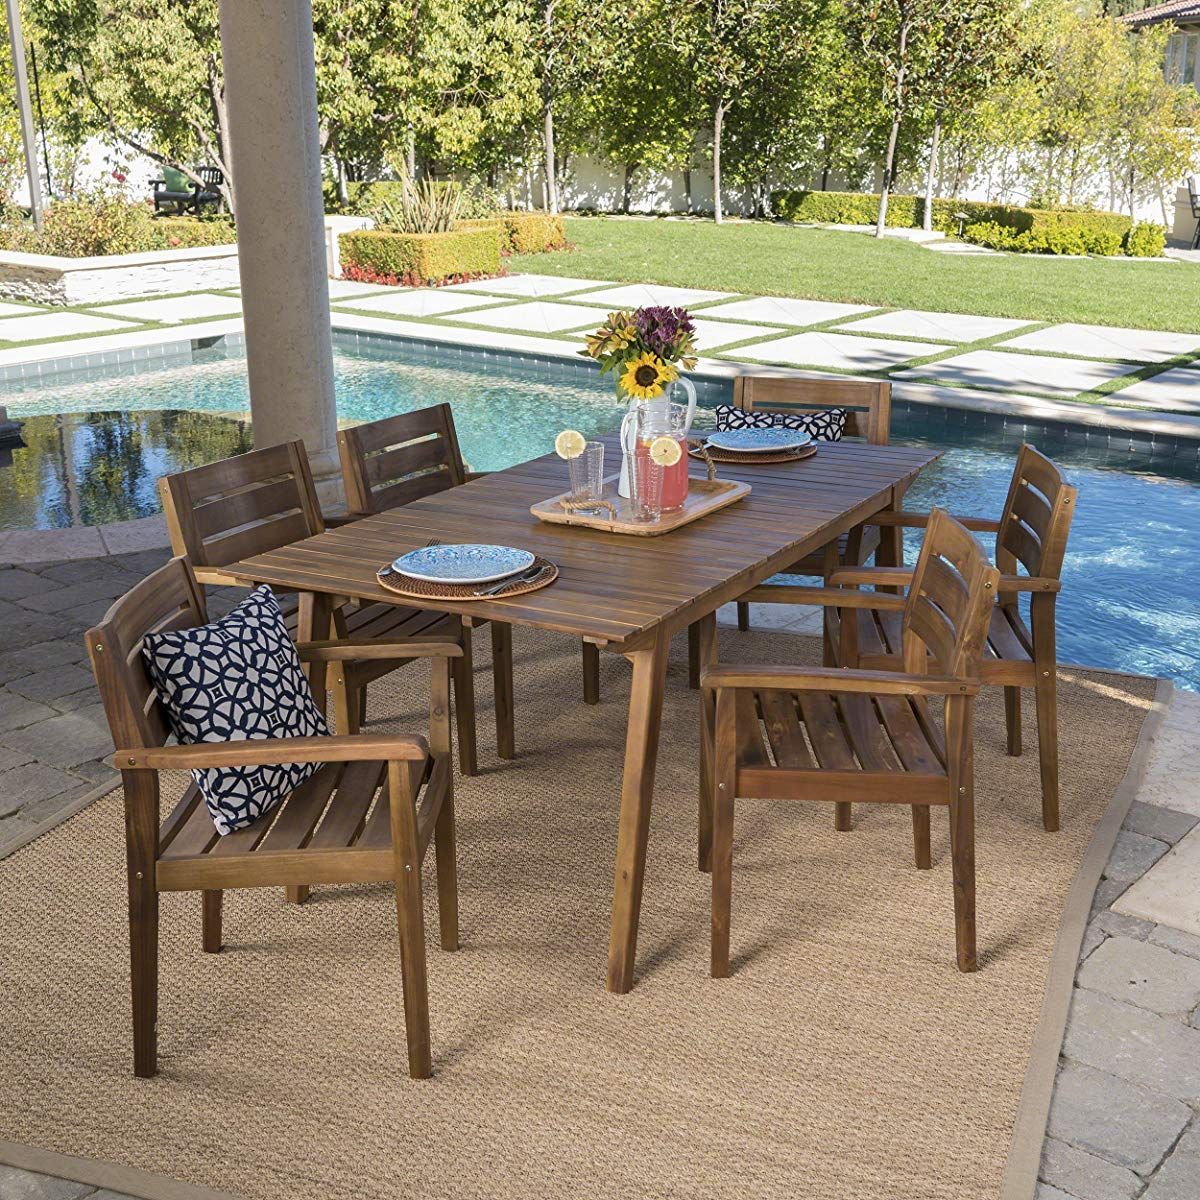 Outdoor Teak Finished Acacia Wood Dining Set | Patio Dining Set, Teak With Regard To Teak Wicker Outdoor Dining Sets (View 8 of 15)